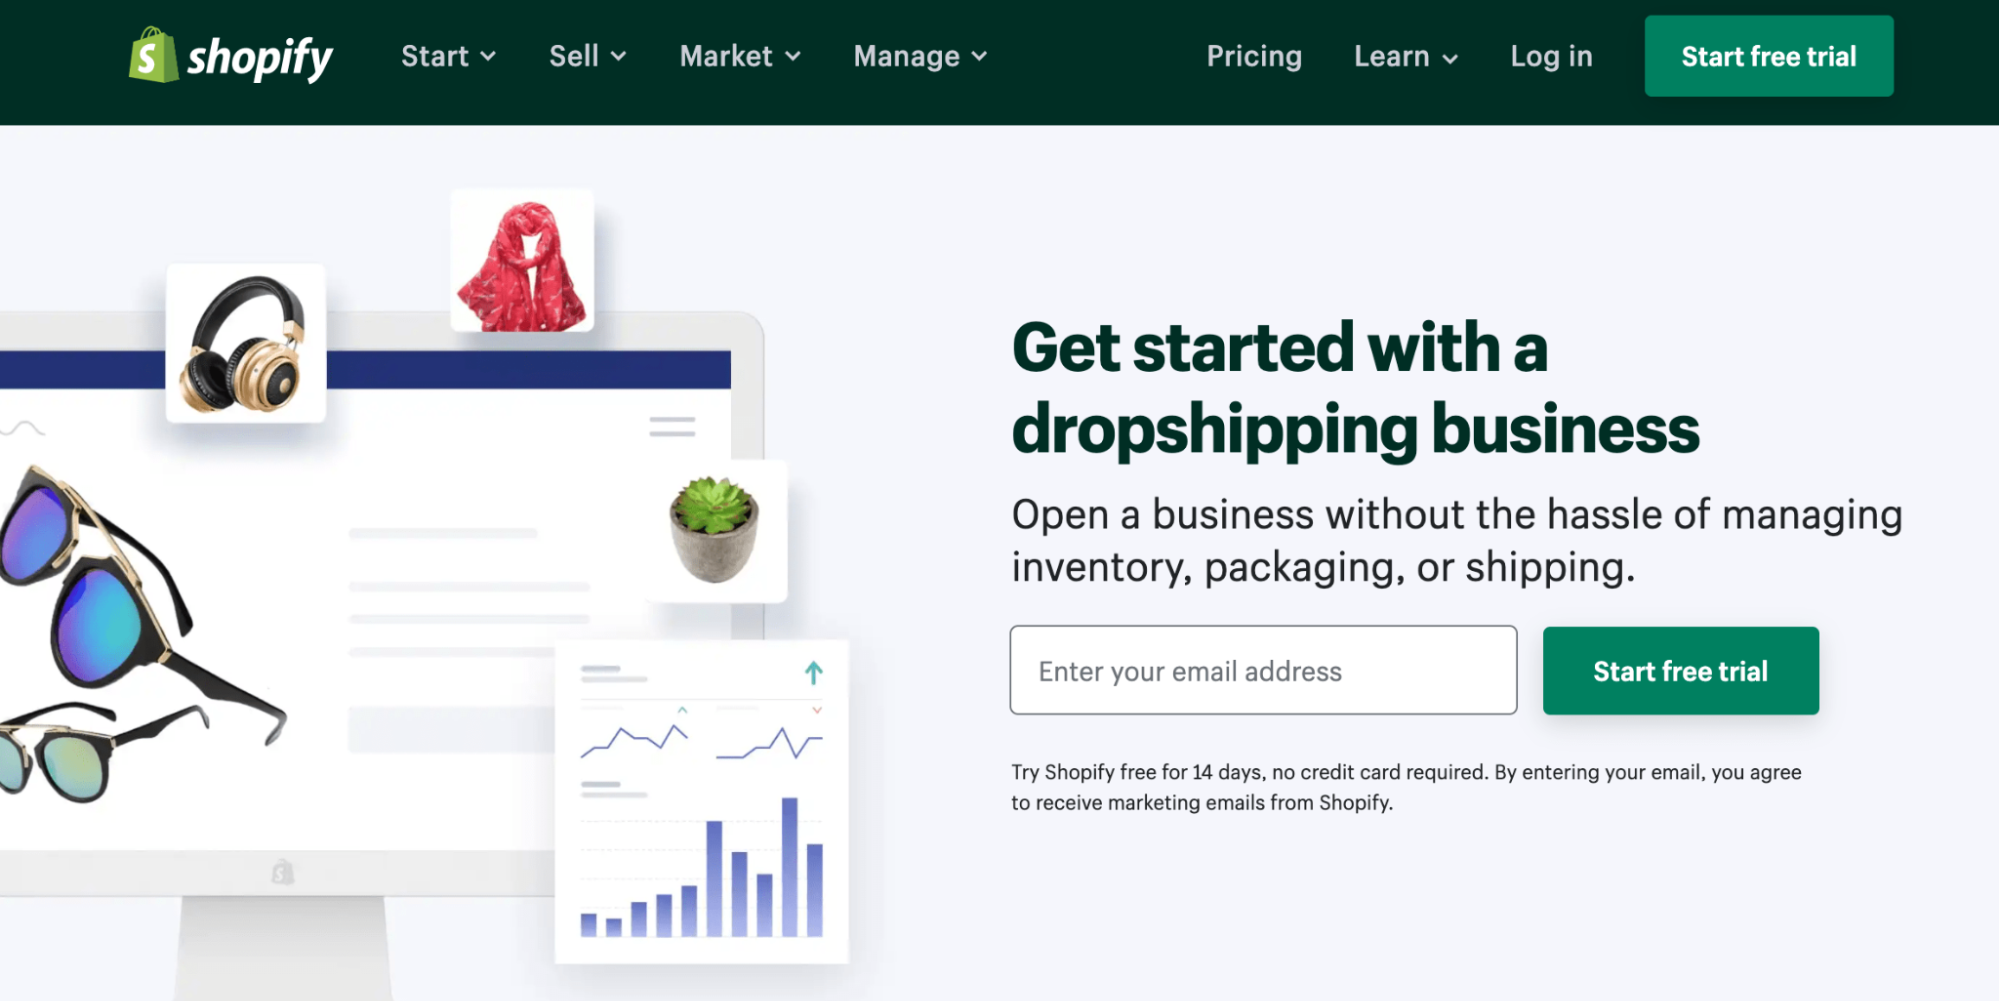 Shopify start your dropshipping business free trial page.